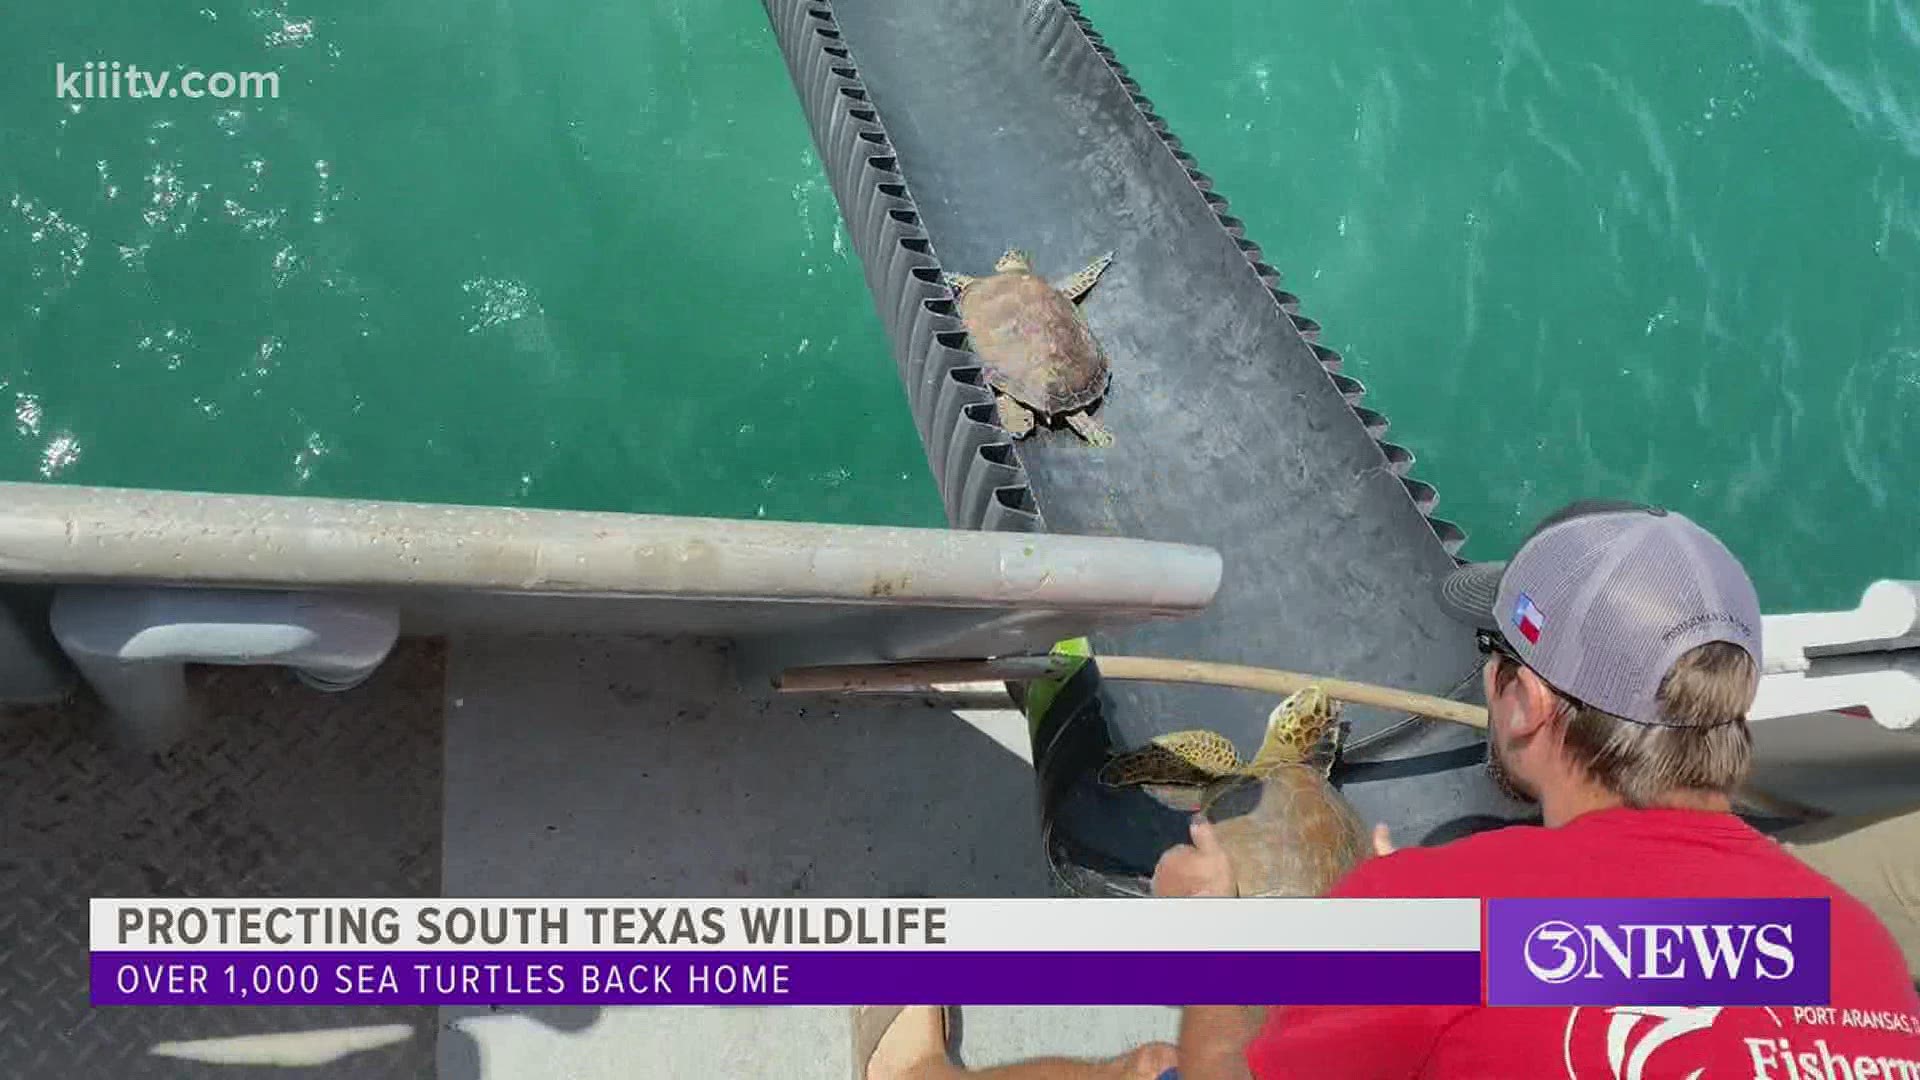 Overall, over 9,000 sea turtles were rescued in the Coastal Bend.